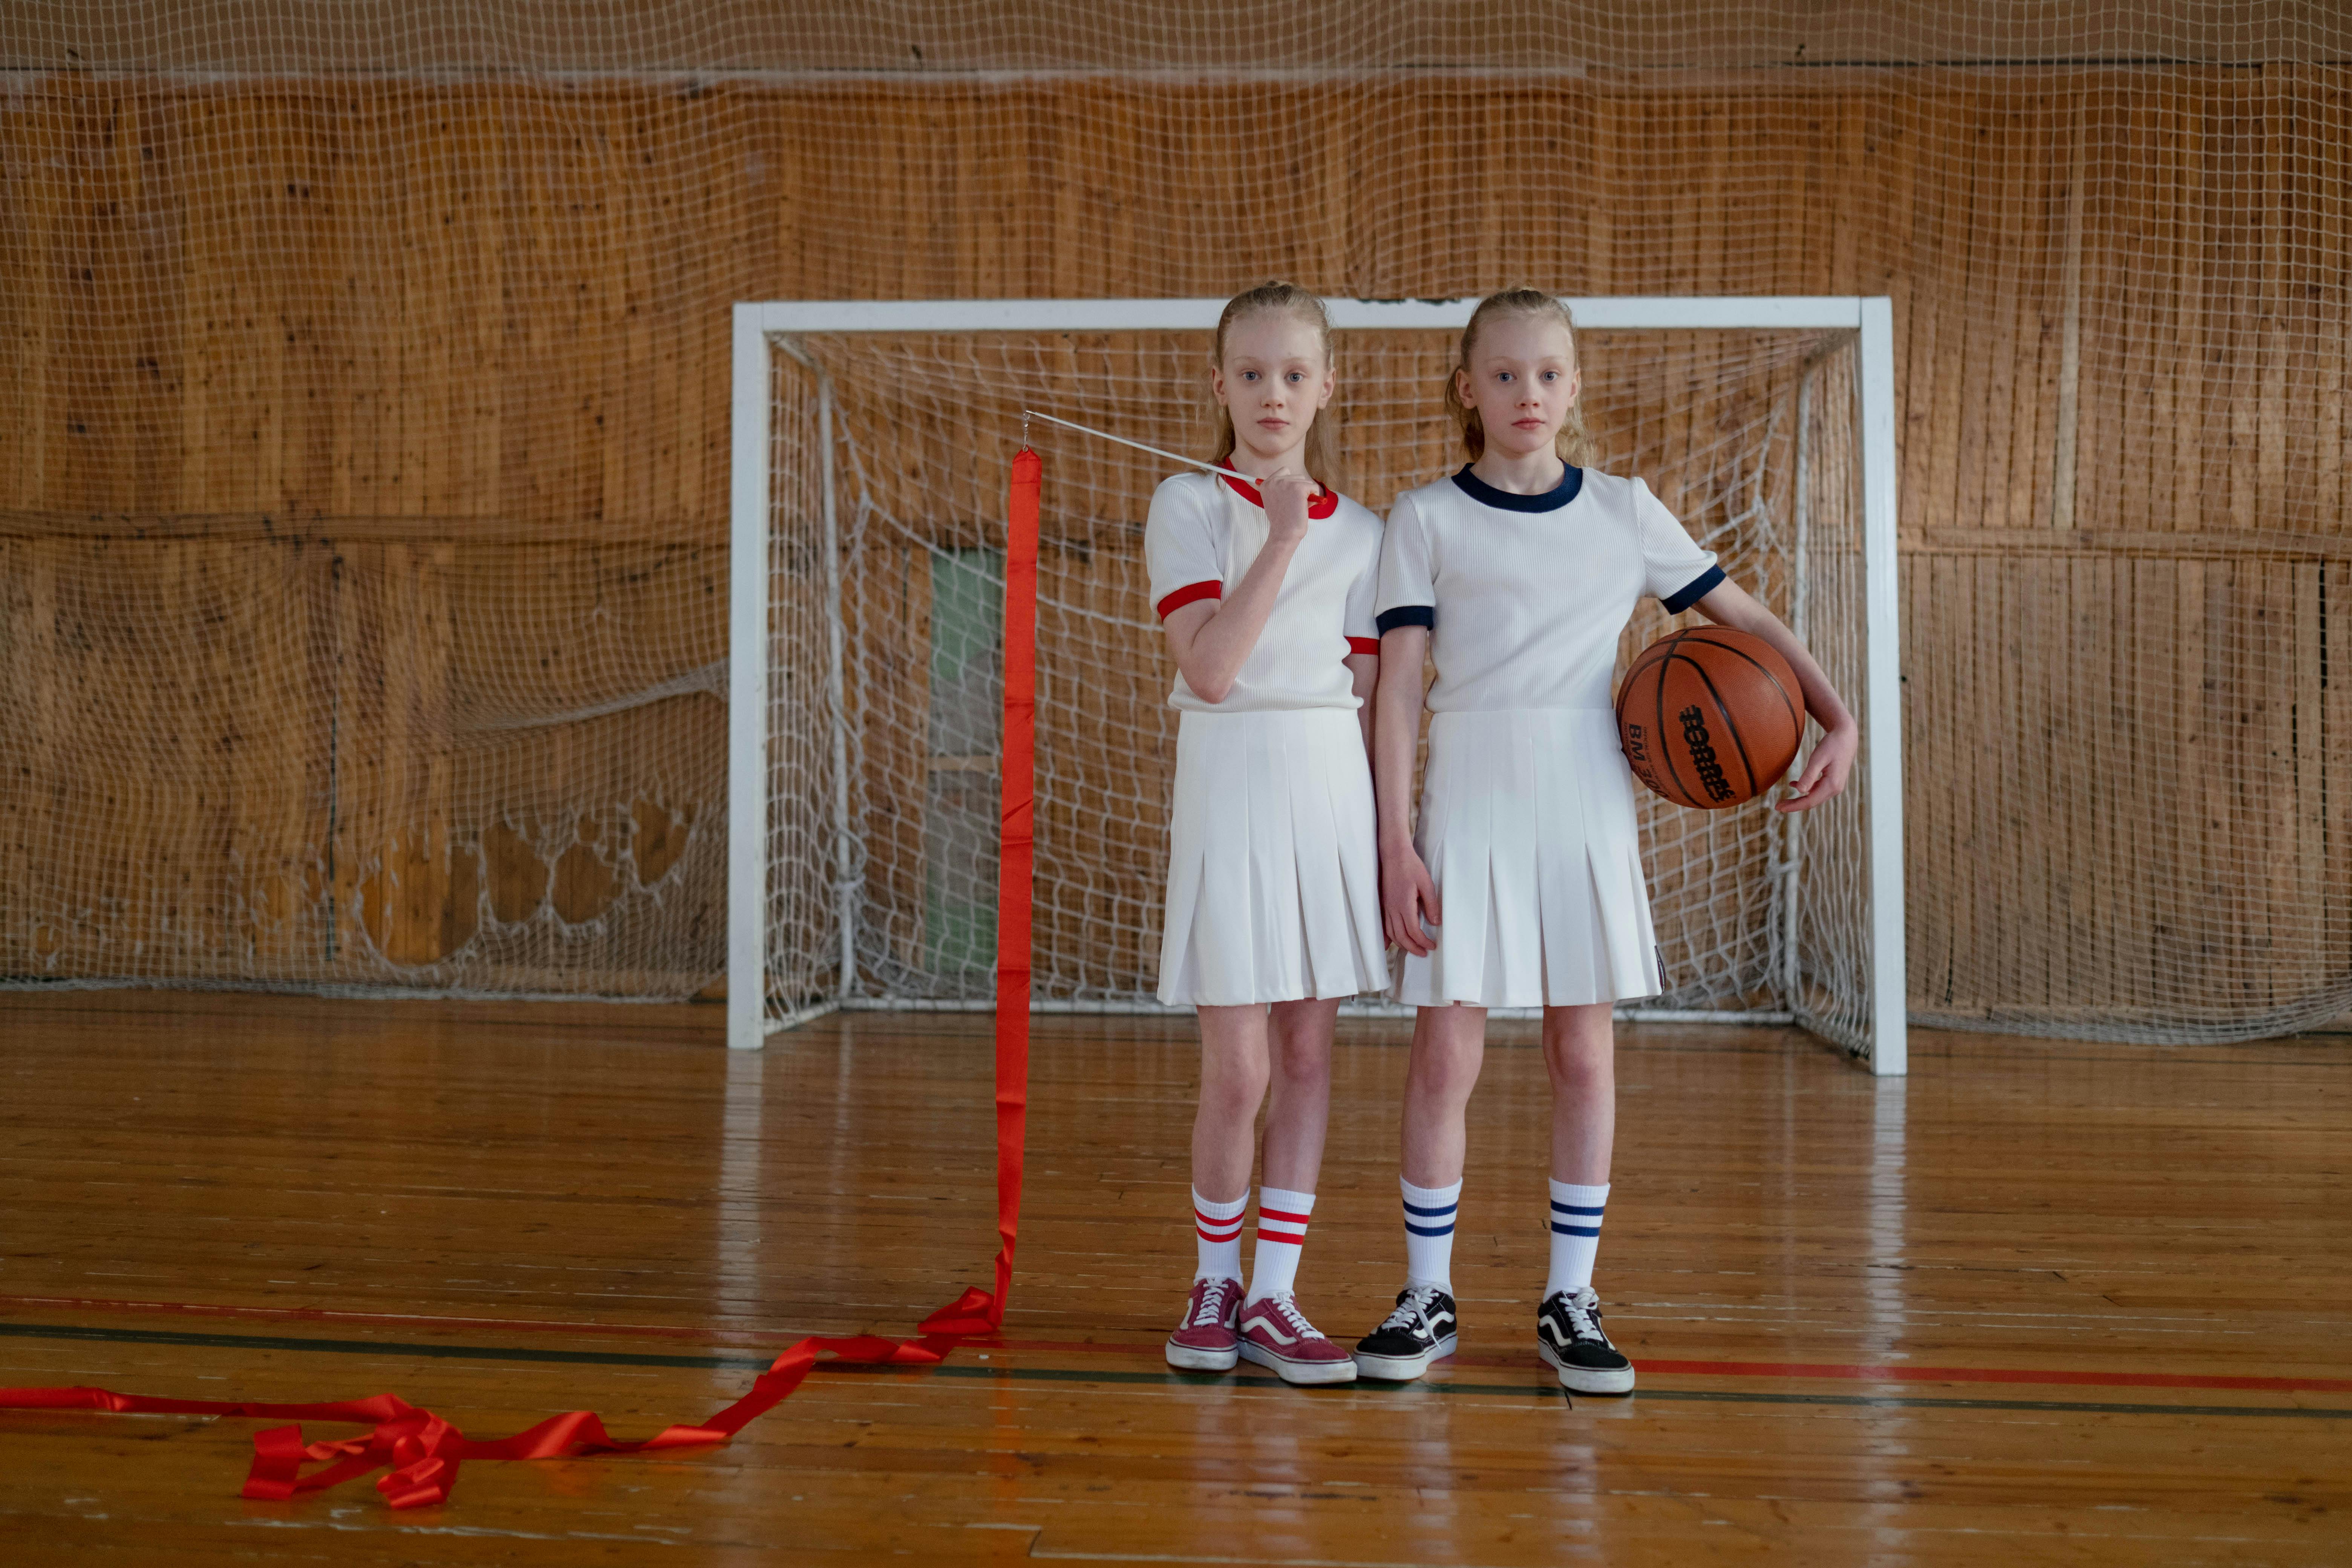 girls standing on the wooden floor holding a basketball and a red ribbon